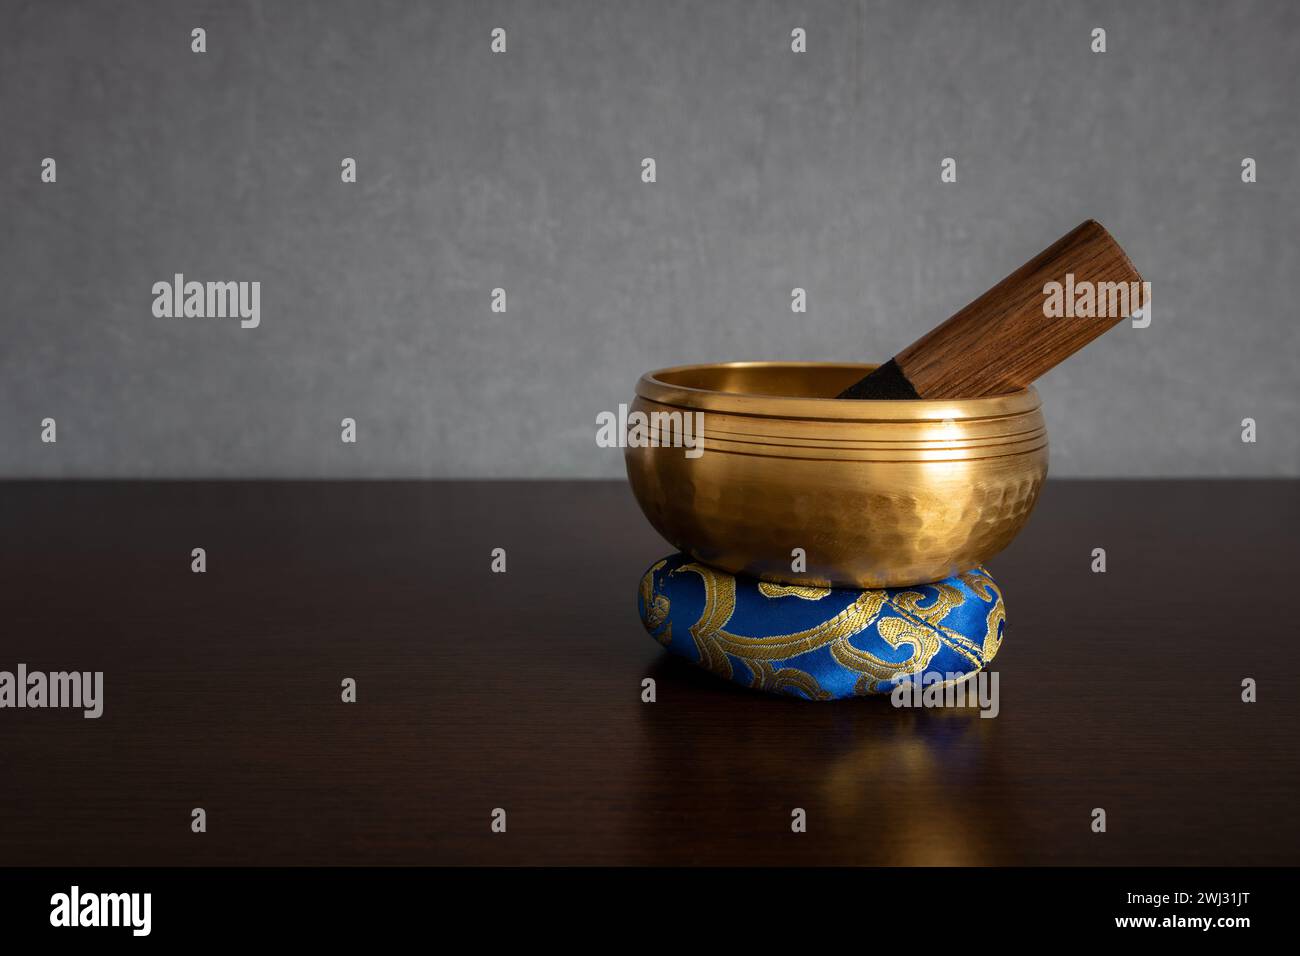 A golden colored Tibetan singing bowl with striker inside standing on a ring cushion isolated on a blurred clean background and empty space for text Stock Photo